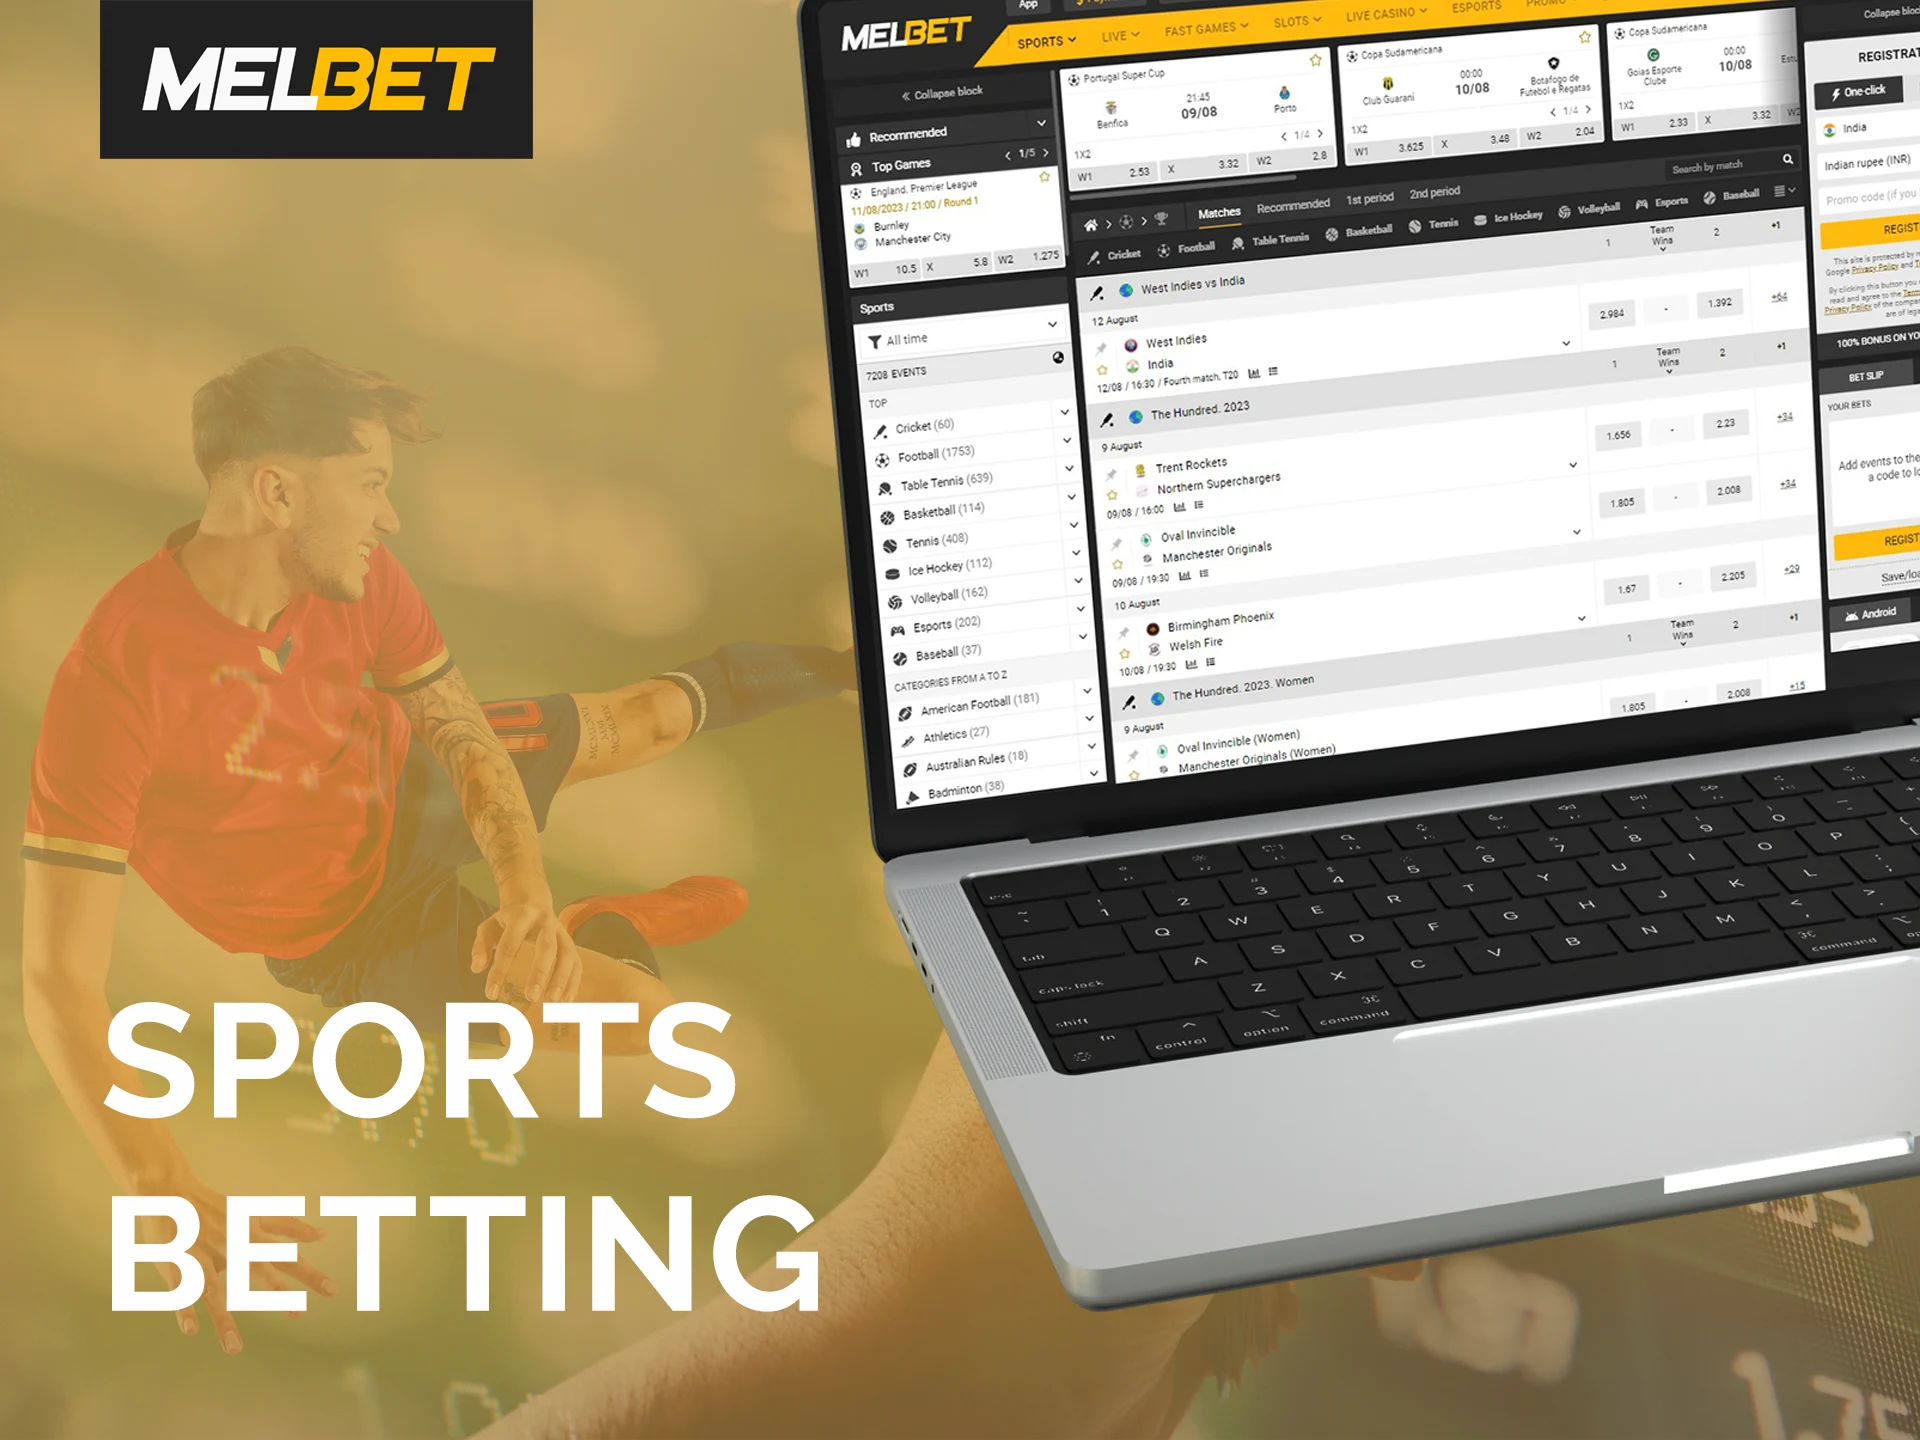 Bet on sports and win.